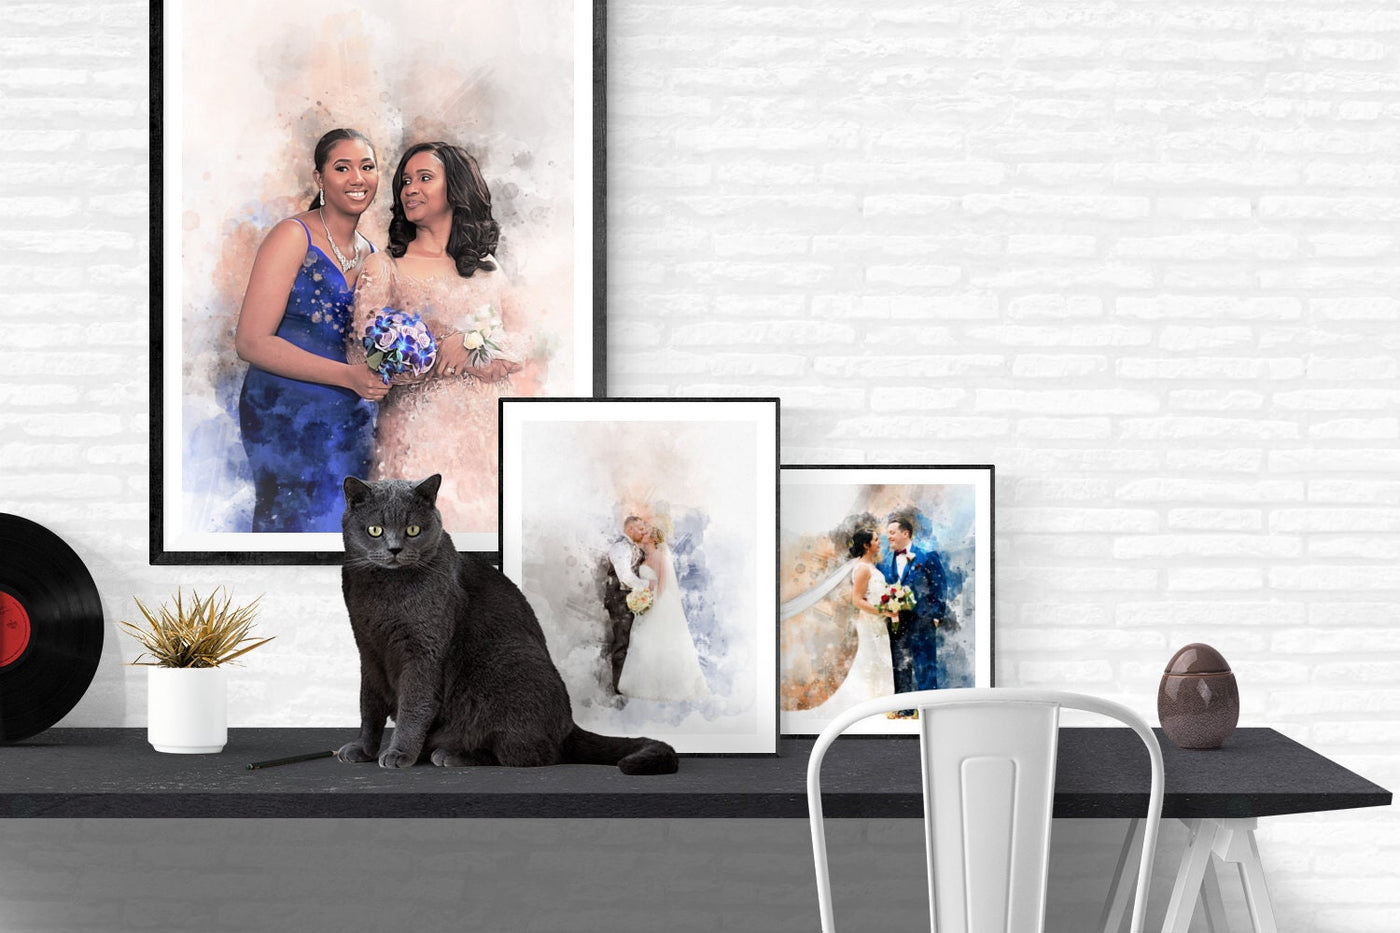 Wedding gift for sister in law for mom for daughter Mothers day Photo into drawing from photo custom Memorial gift for loss of mother